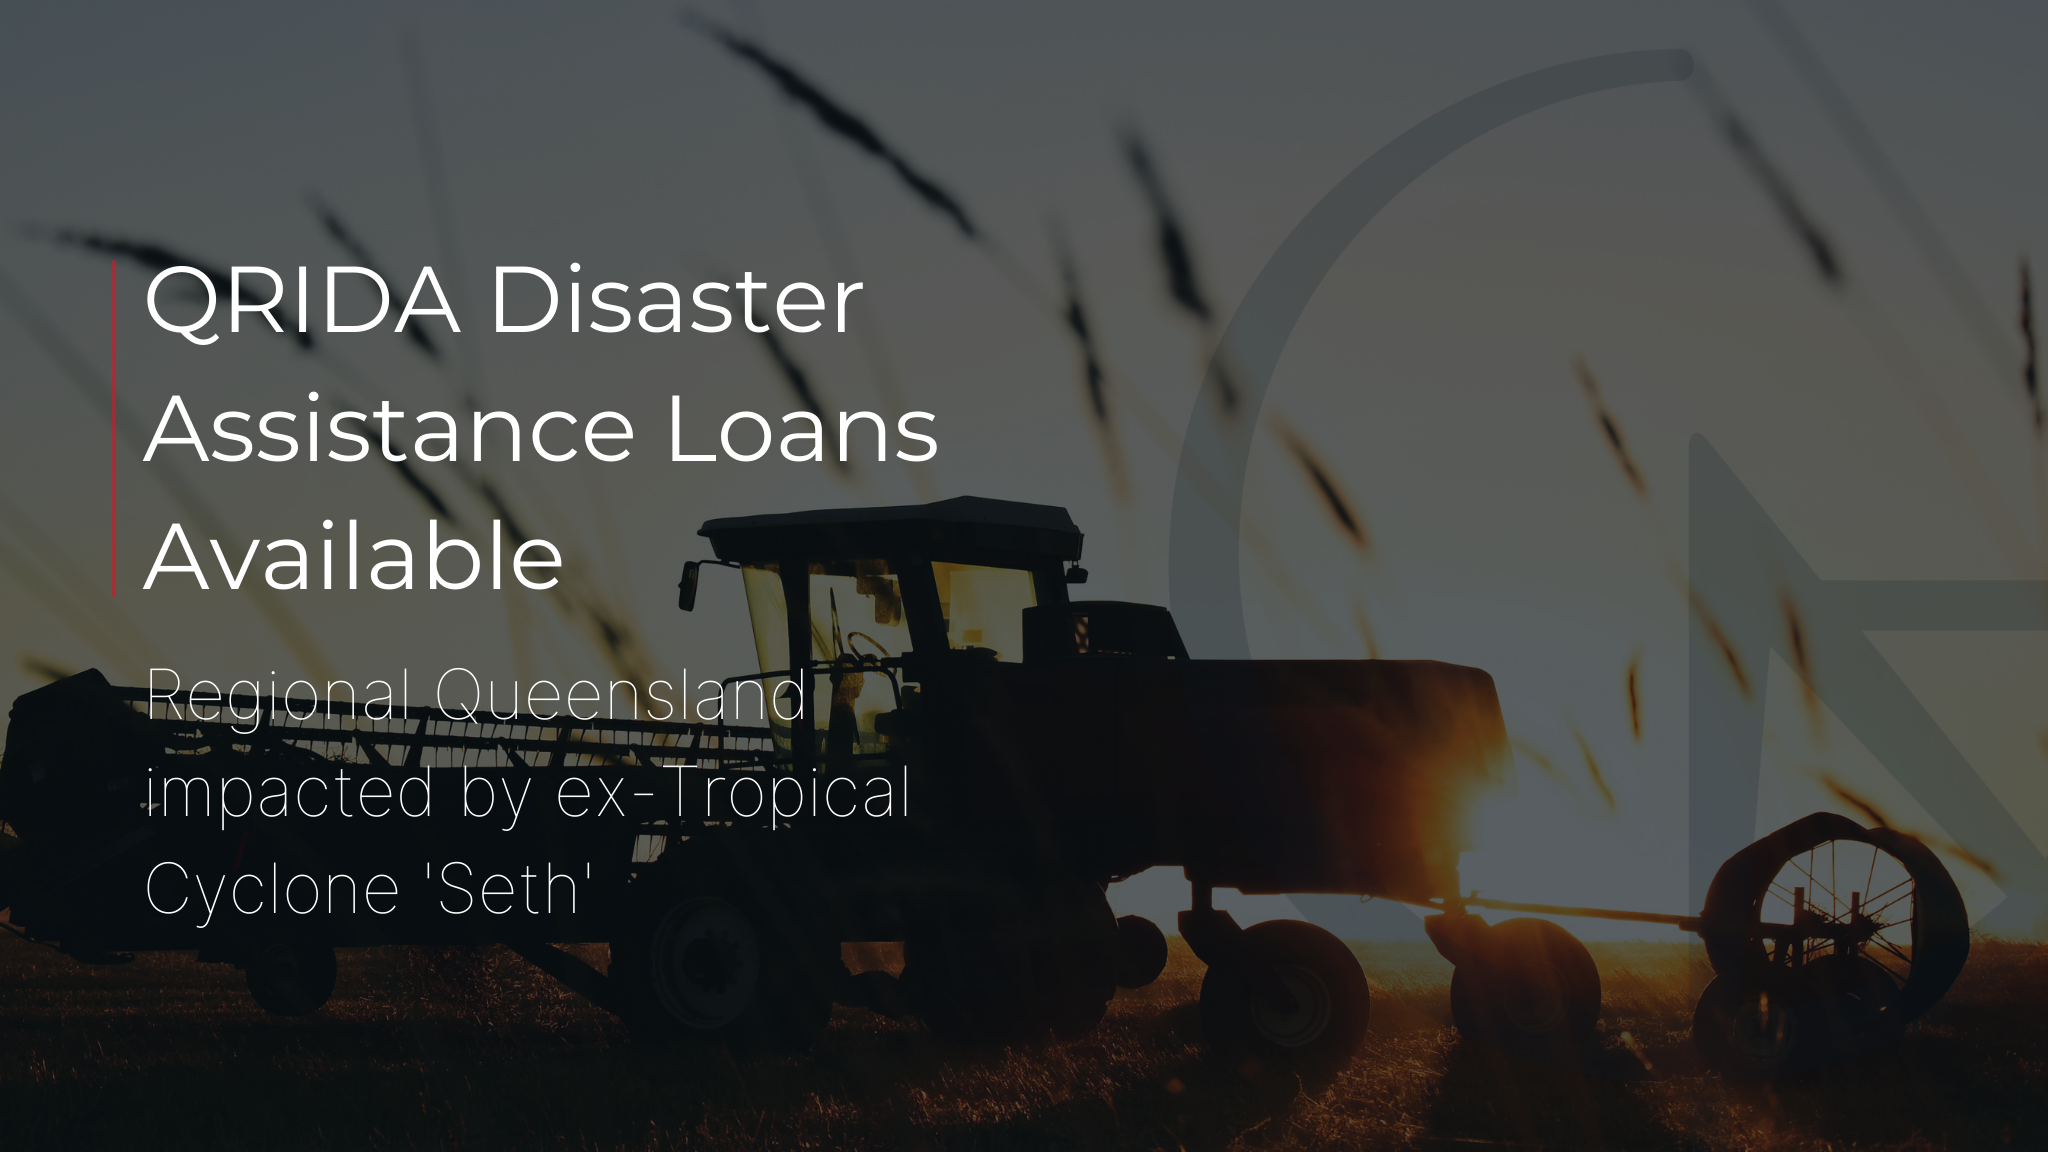 Disaster Assistance Loans Available | Regional Queensland impacted by ex-Tropical Cyclone 'Seth'